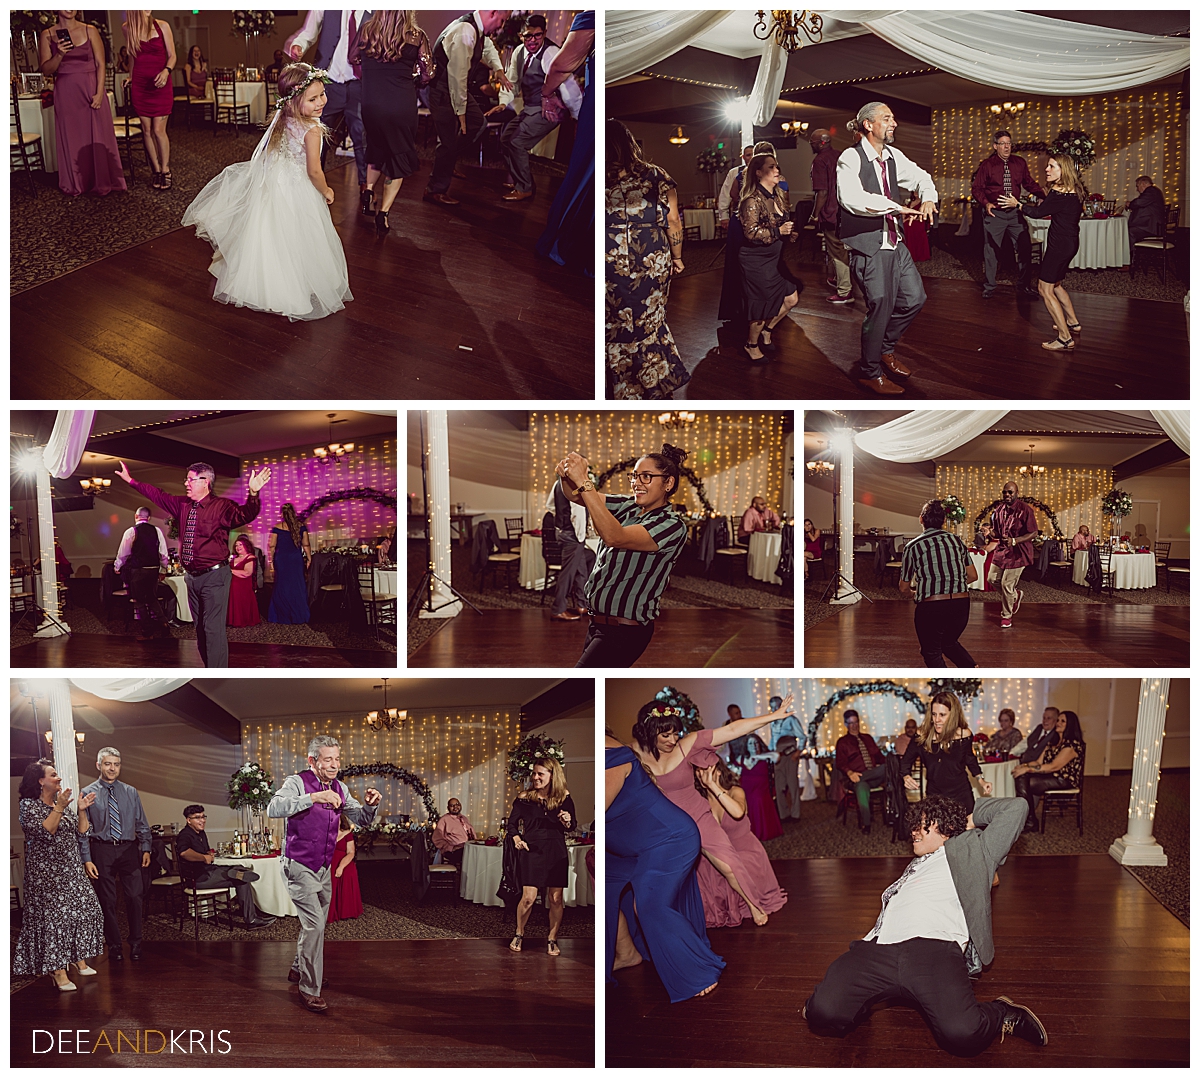 Seven color images of guests dancing at reception.